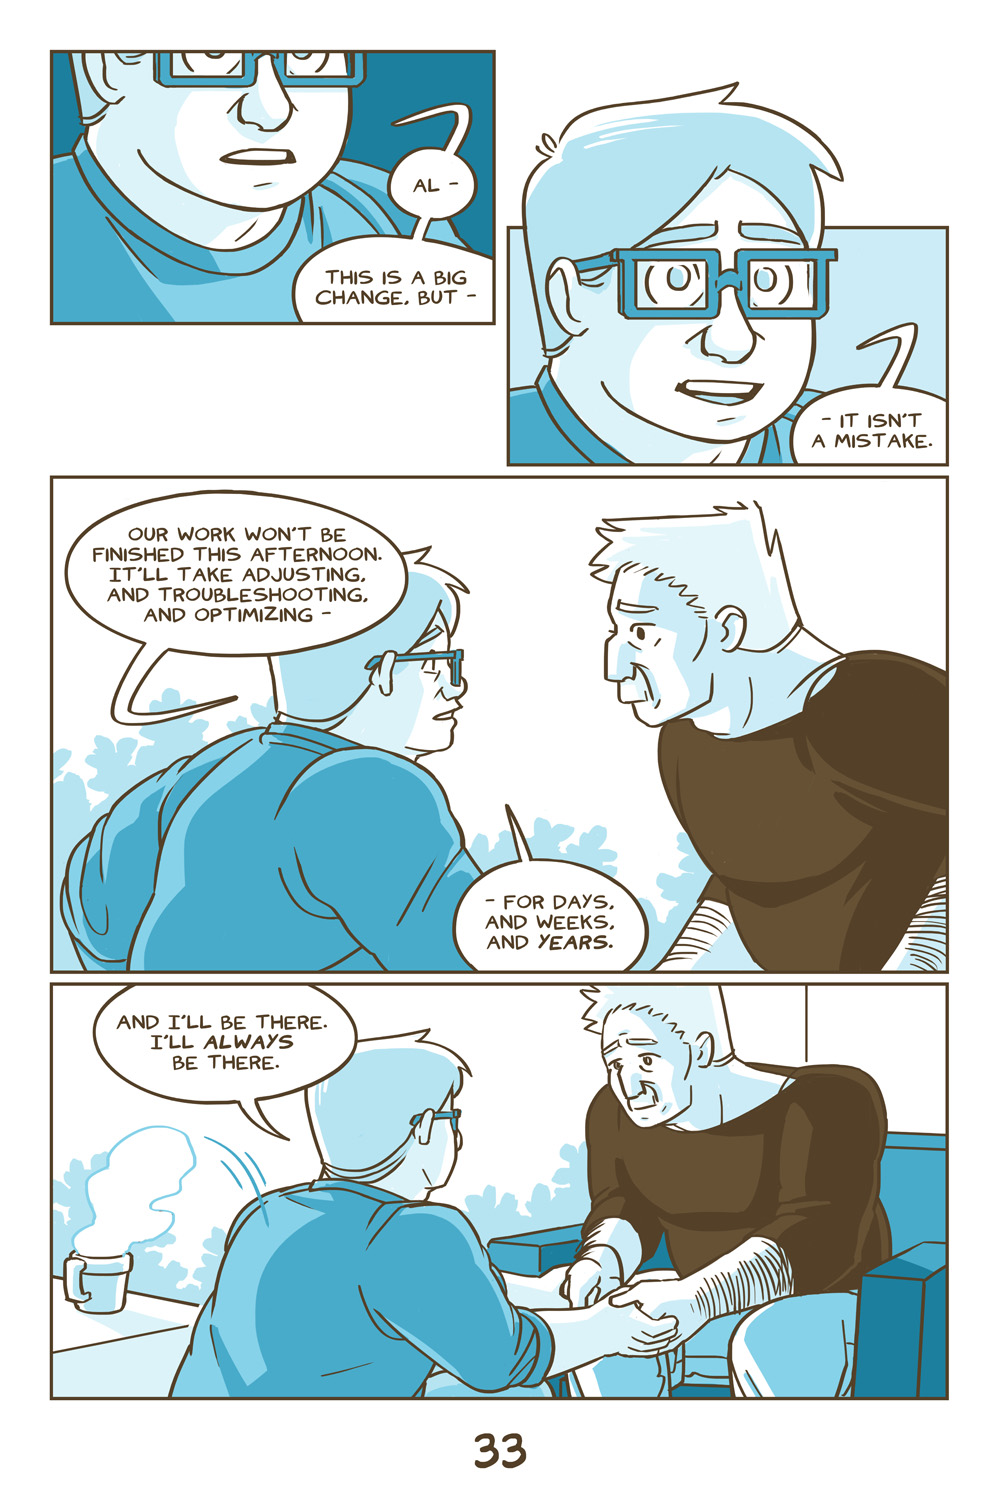 Chapter 8, Page 33